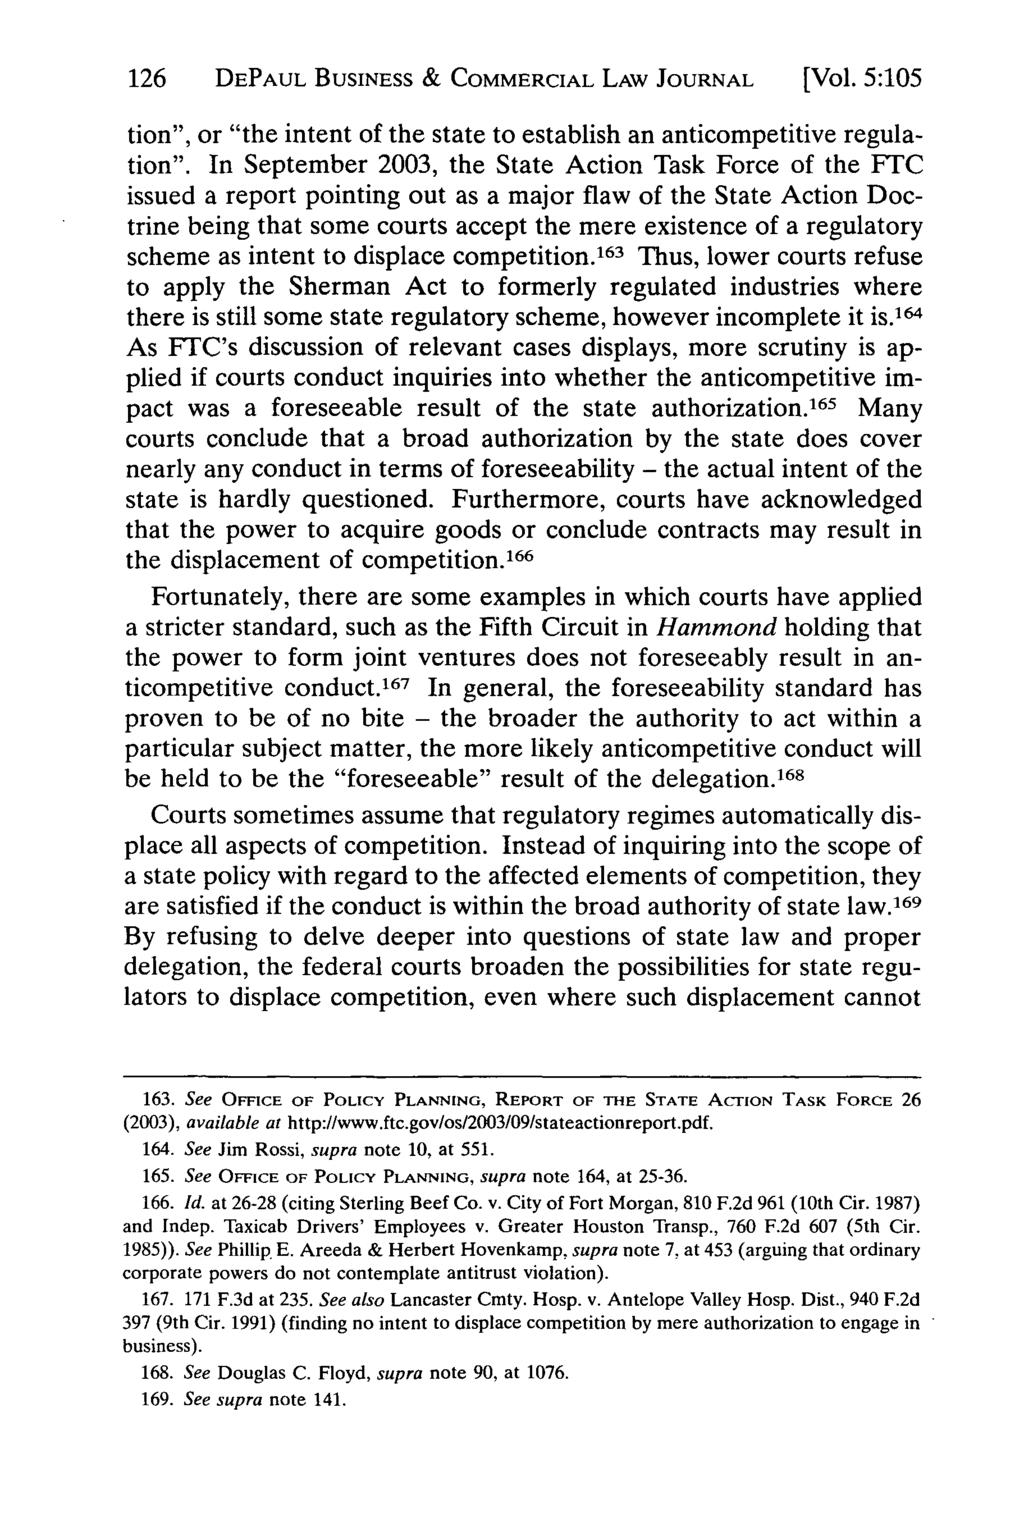 126 DEPAUL BUSINESS & COMMERCIAL LAW JOURNAL [Vol. 5:105 tion", or "the intent of the state to establish an anticompetitive regulation".